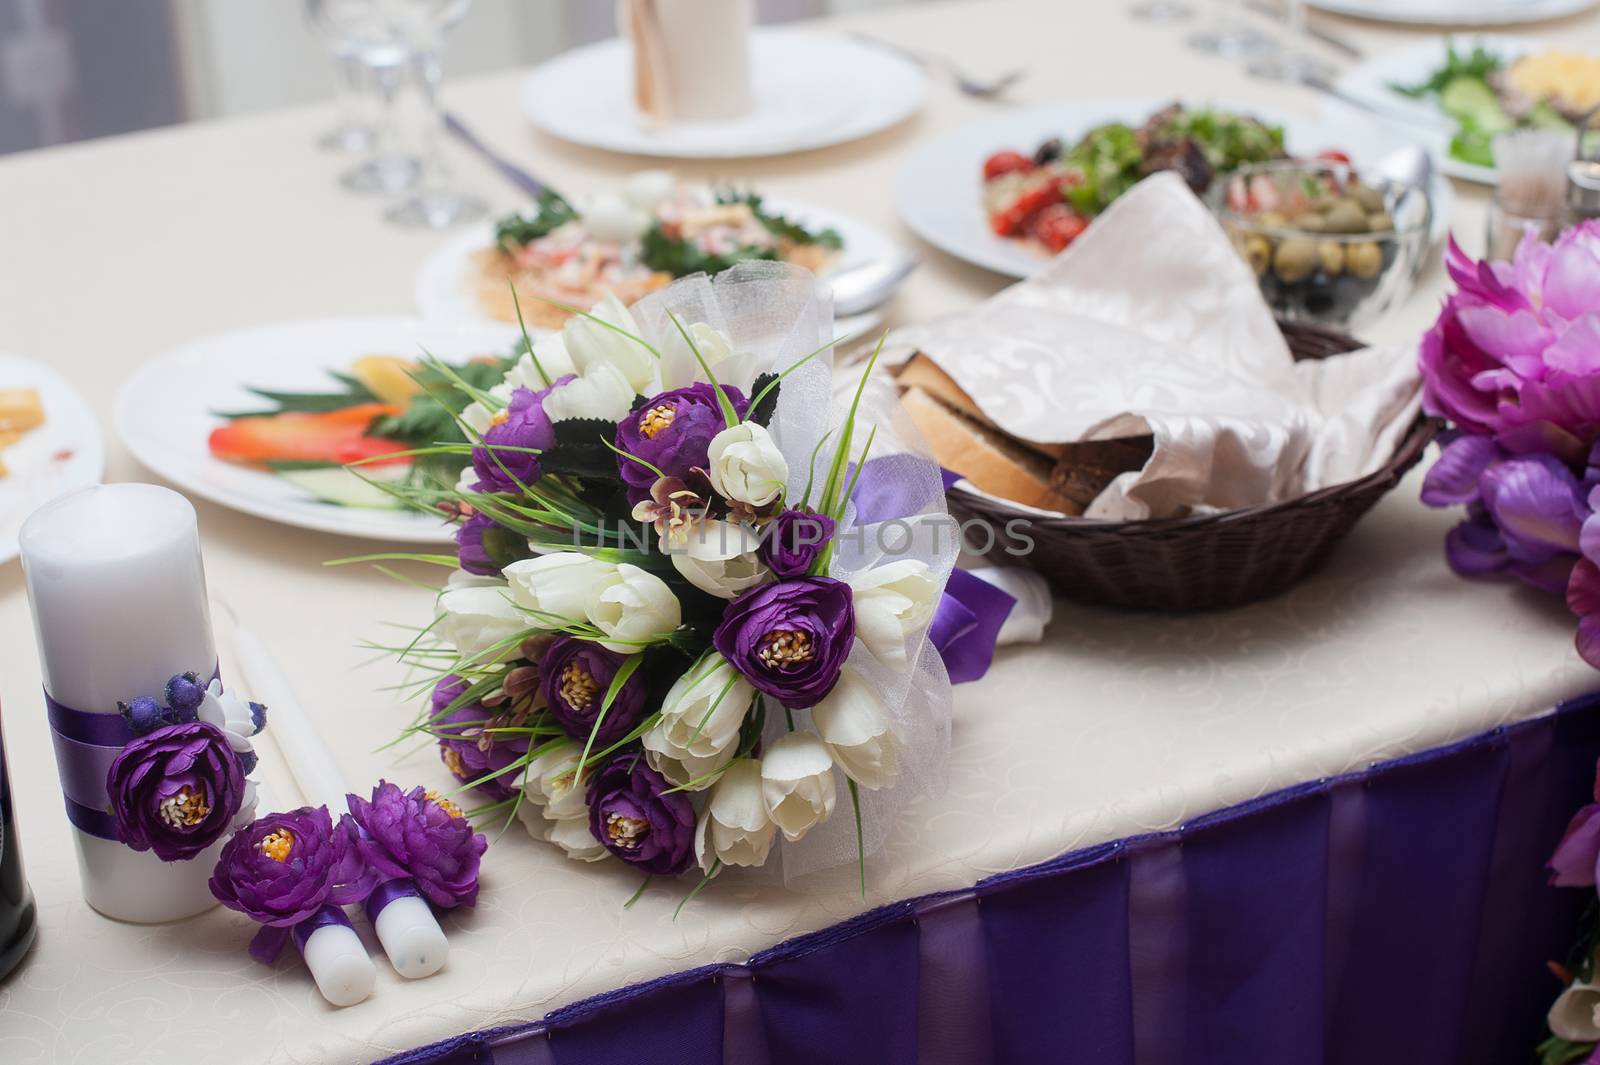 Beautiful decor of flowers at the wedding table by timonko